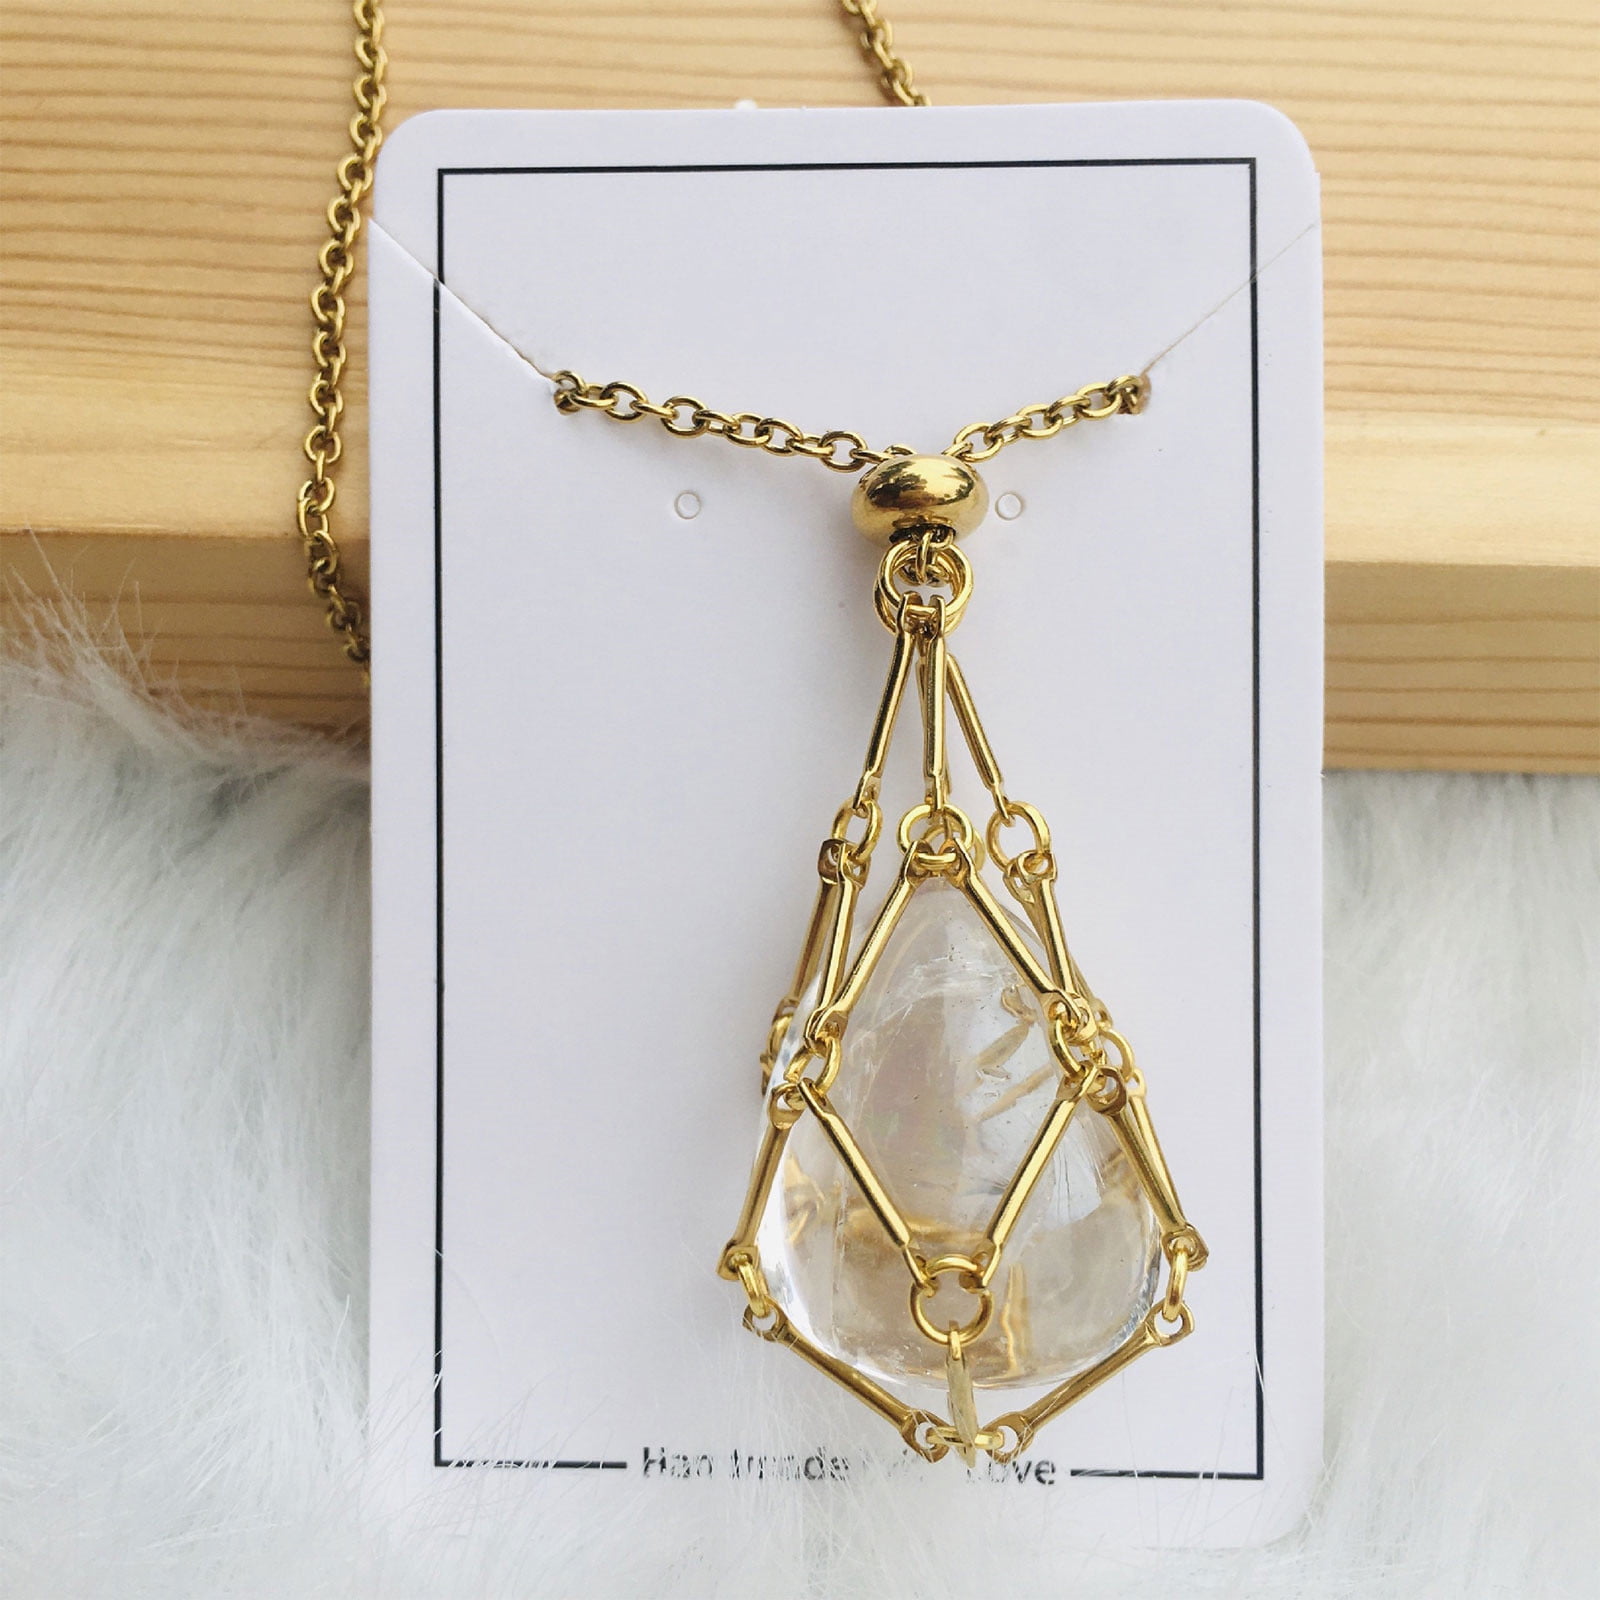 Clearance! Crystal Stone Holder Necklace, Adjustable Length Crystal Pendant Necklace, Adjustable Necklace Cord Crystal Holder Necklace for Women Men